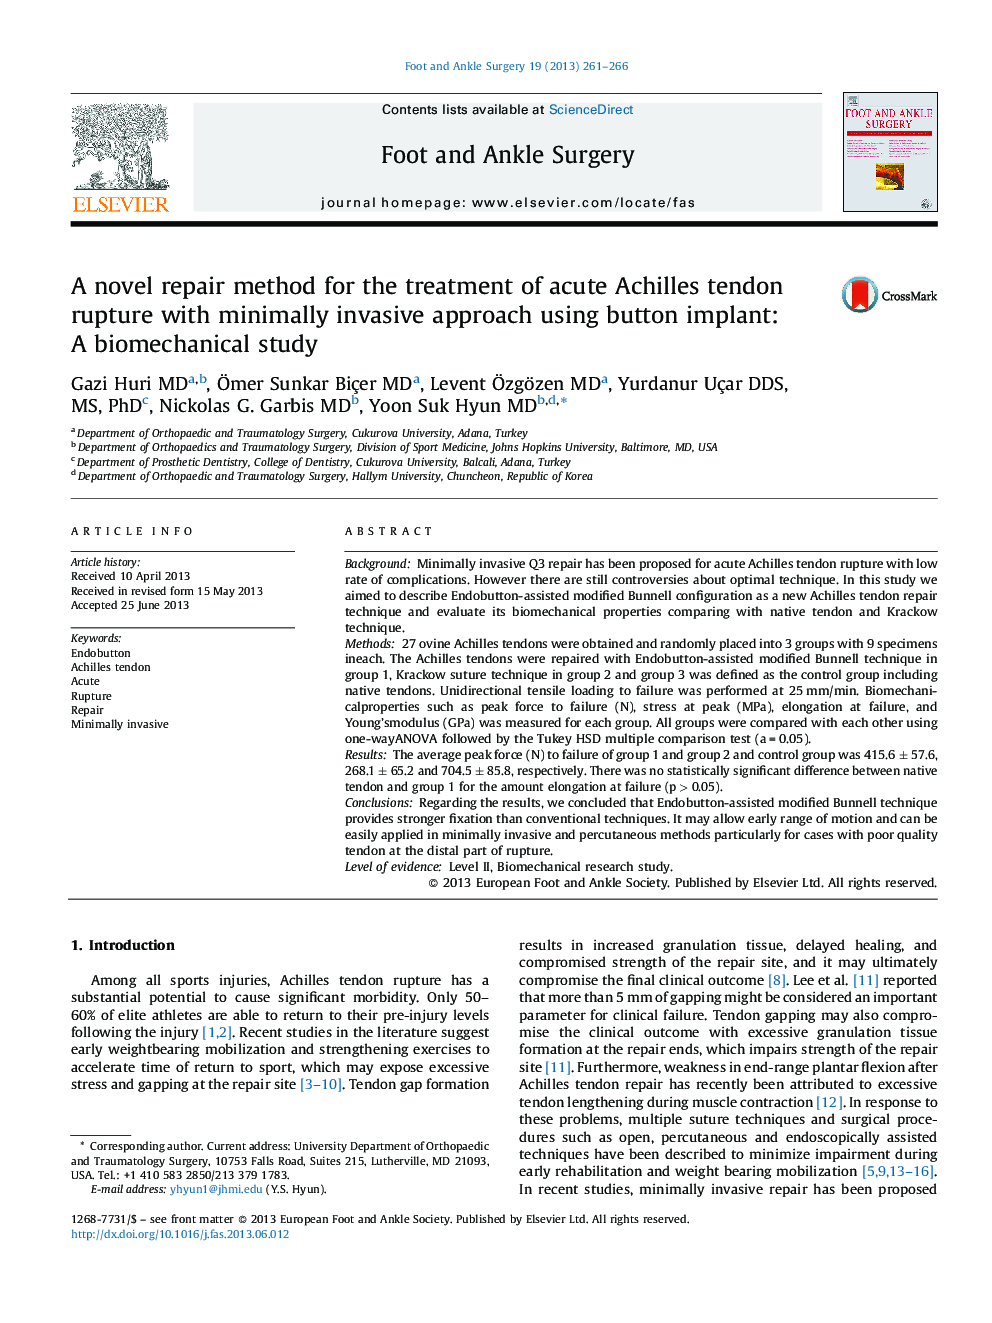 A novel repair method for the treatment of acute Achilles tendon rupture with minimally invasive approach using button implant: A biomechanical study